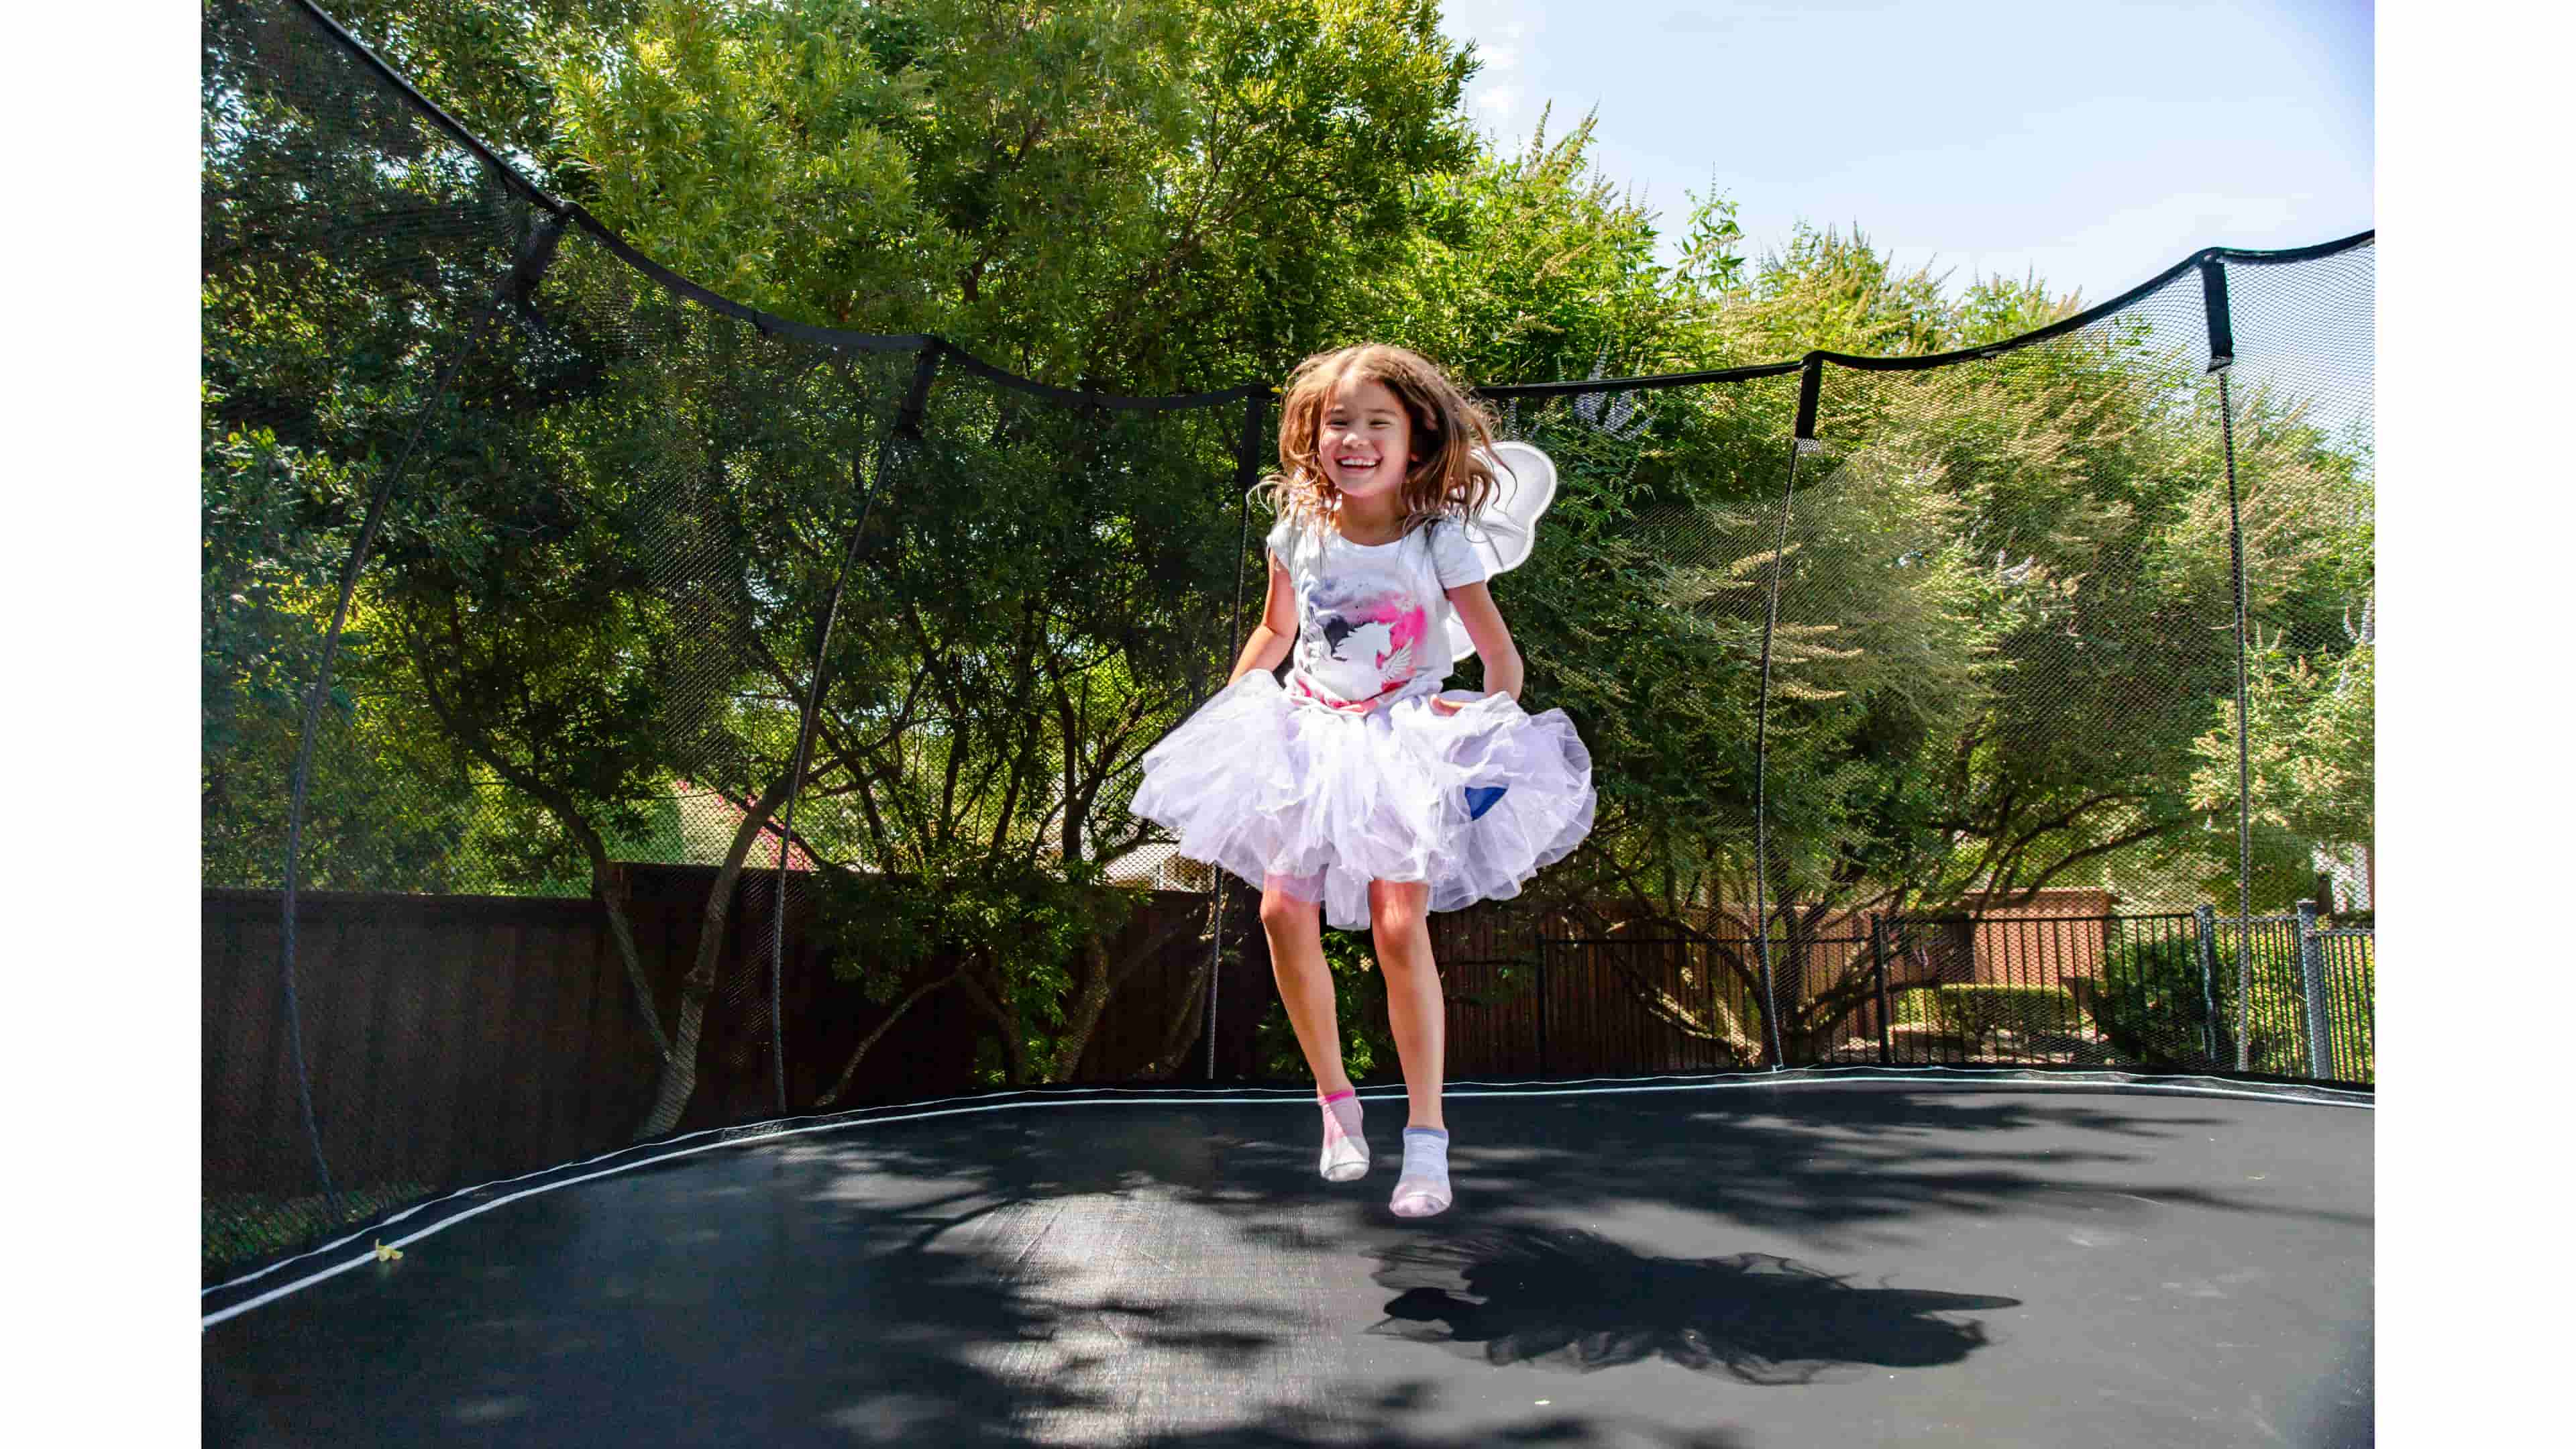 Are In Ground Trampolines Safer? | The Honest Truth 